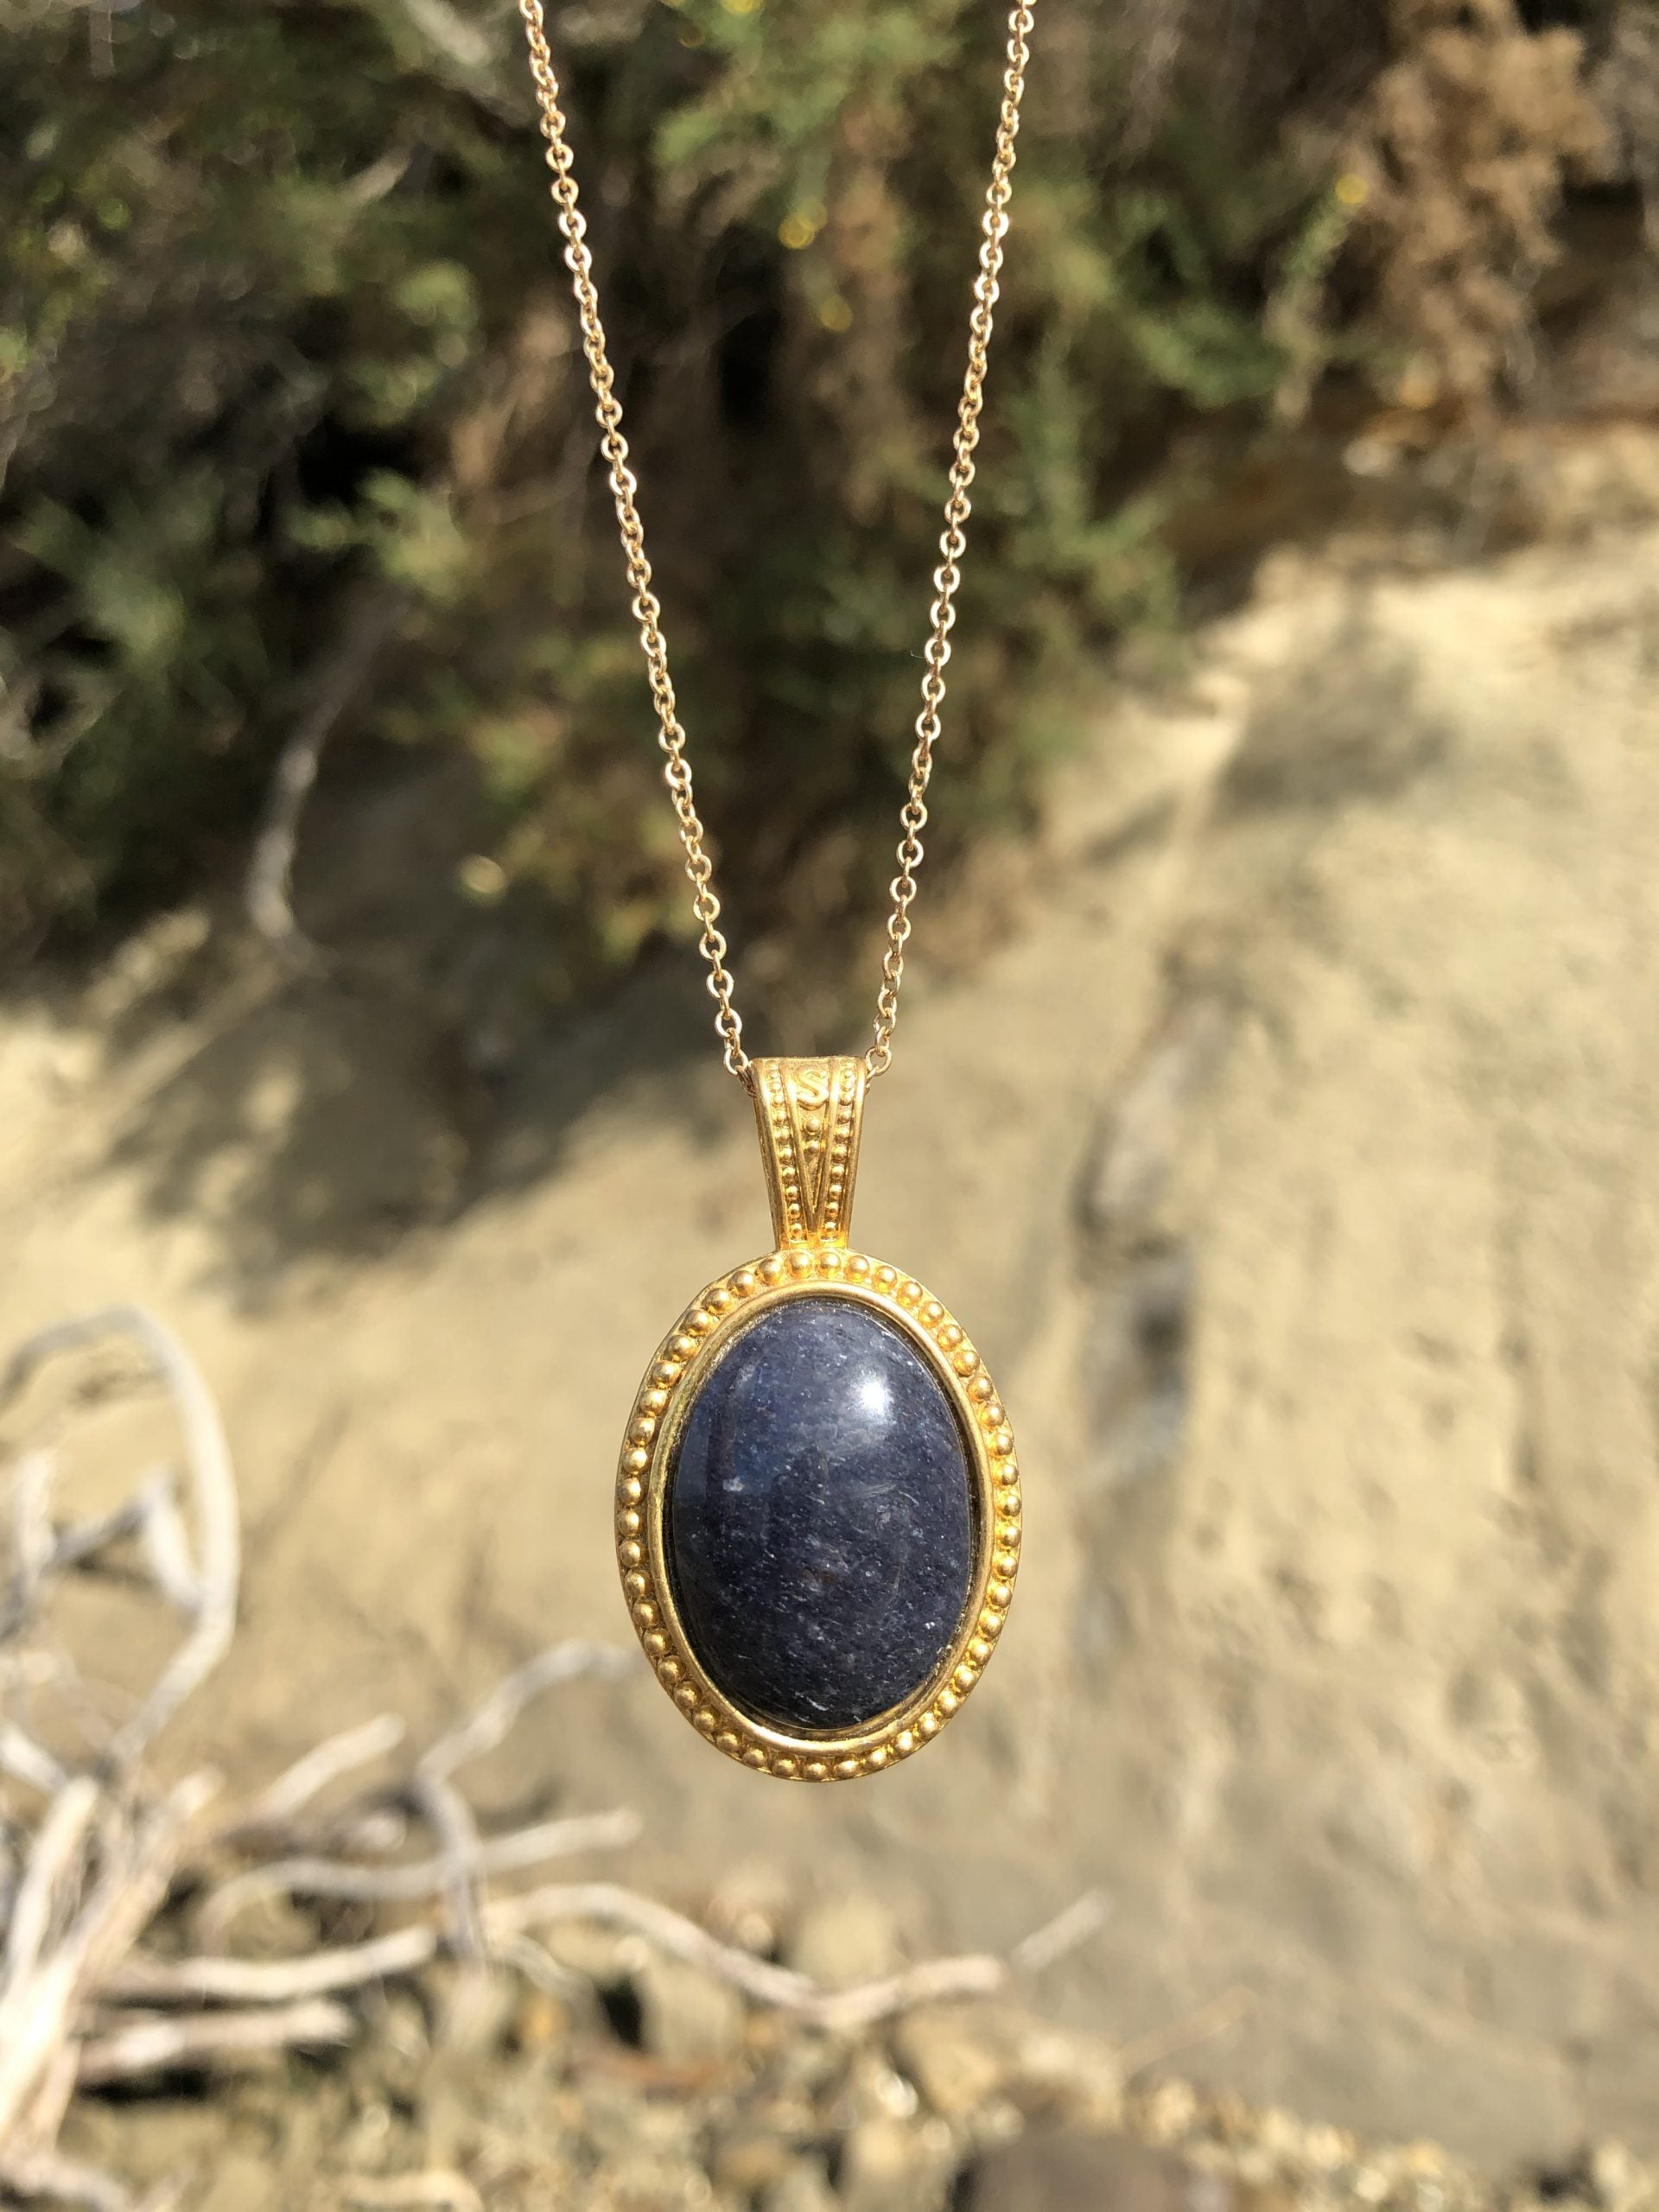 Necklace with natural blue aventurine, hand polished to a 25x18mm cabochon and set in a gold plated setting with 19 inch chain, on beach